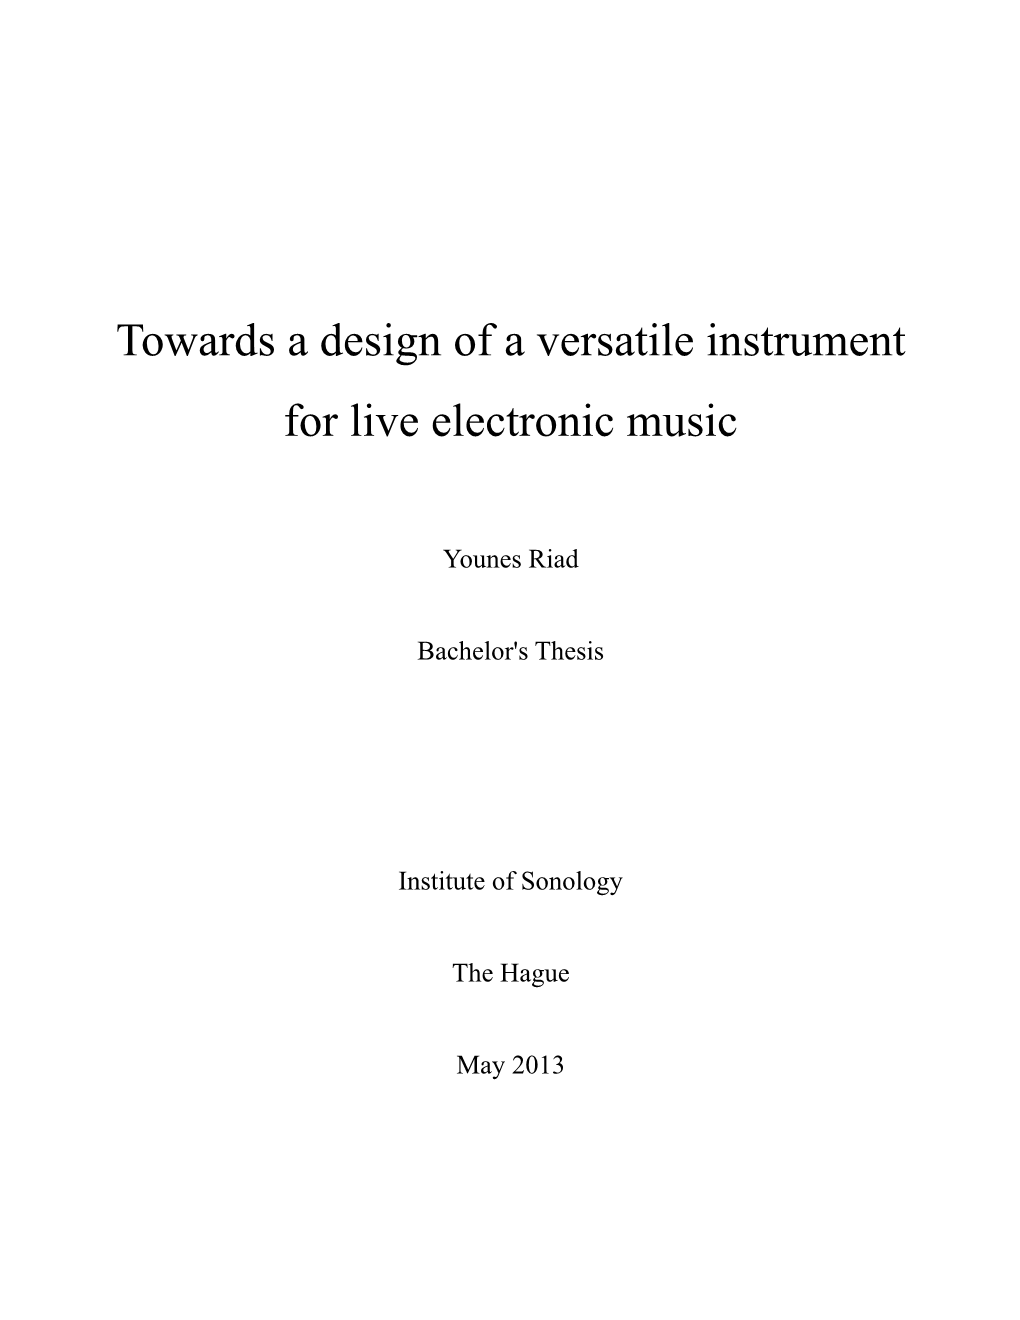 Towards a Design of a Versatile Instrument for Live Electronic Music